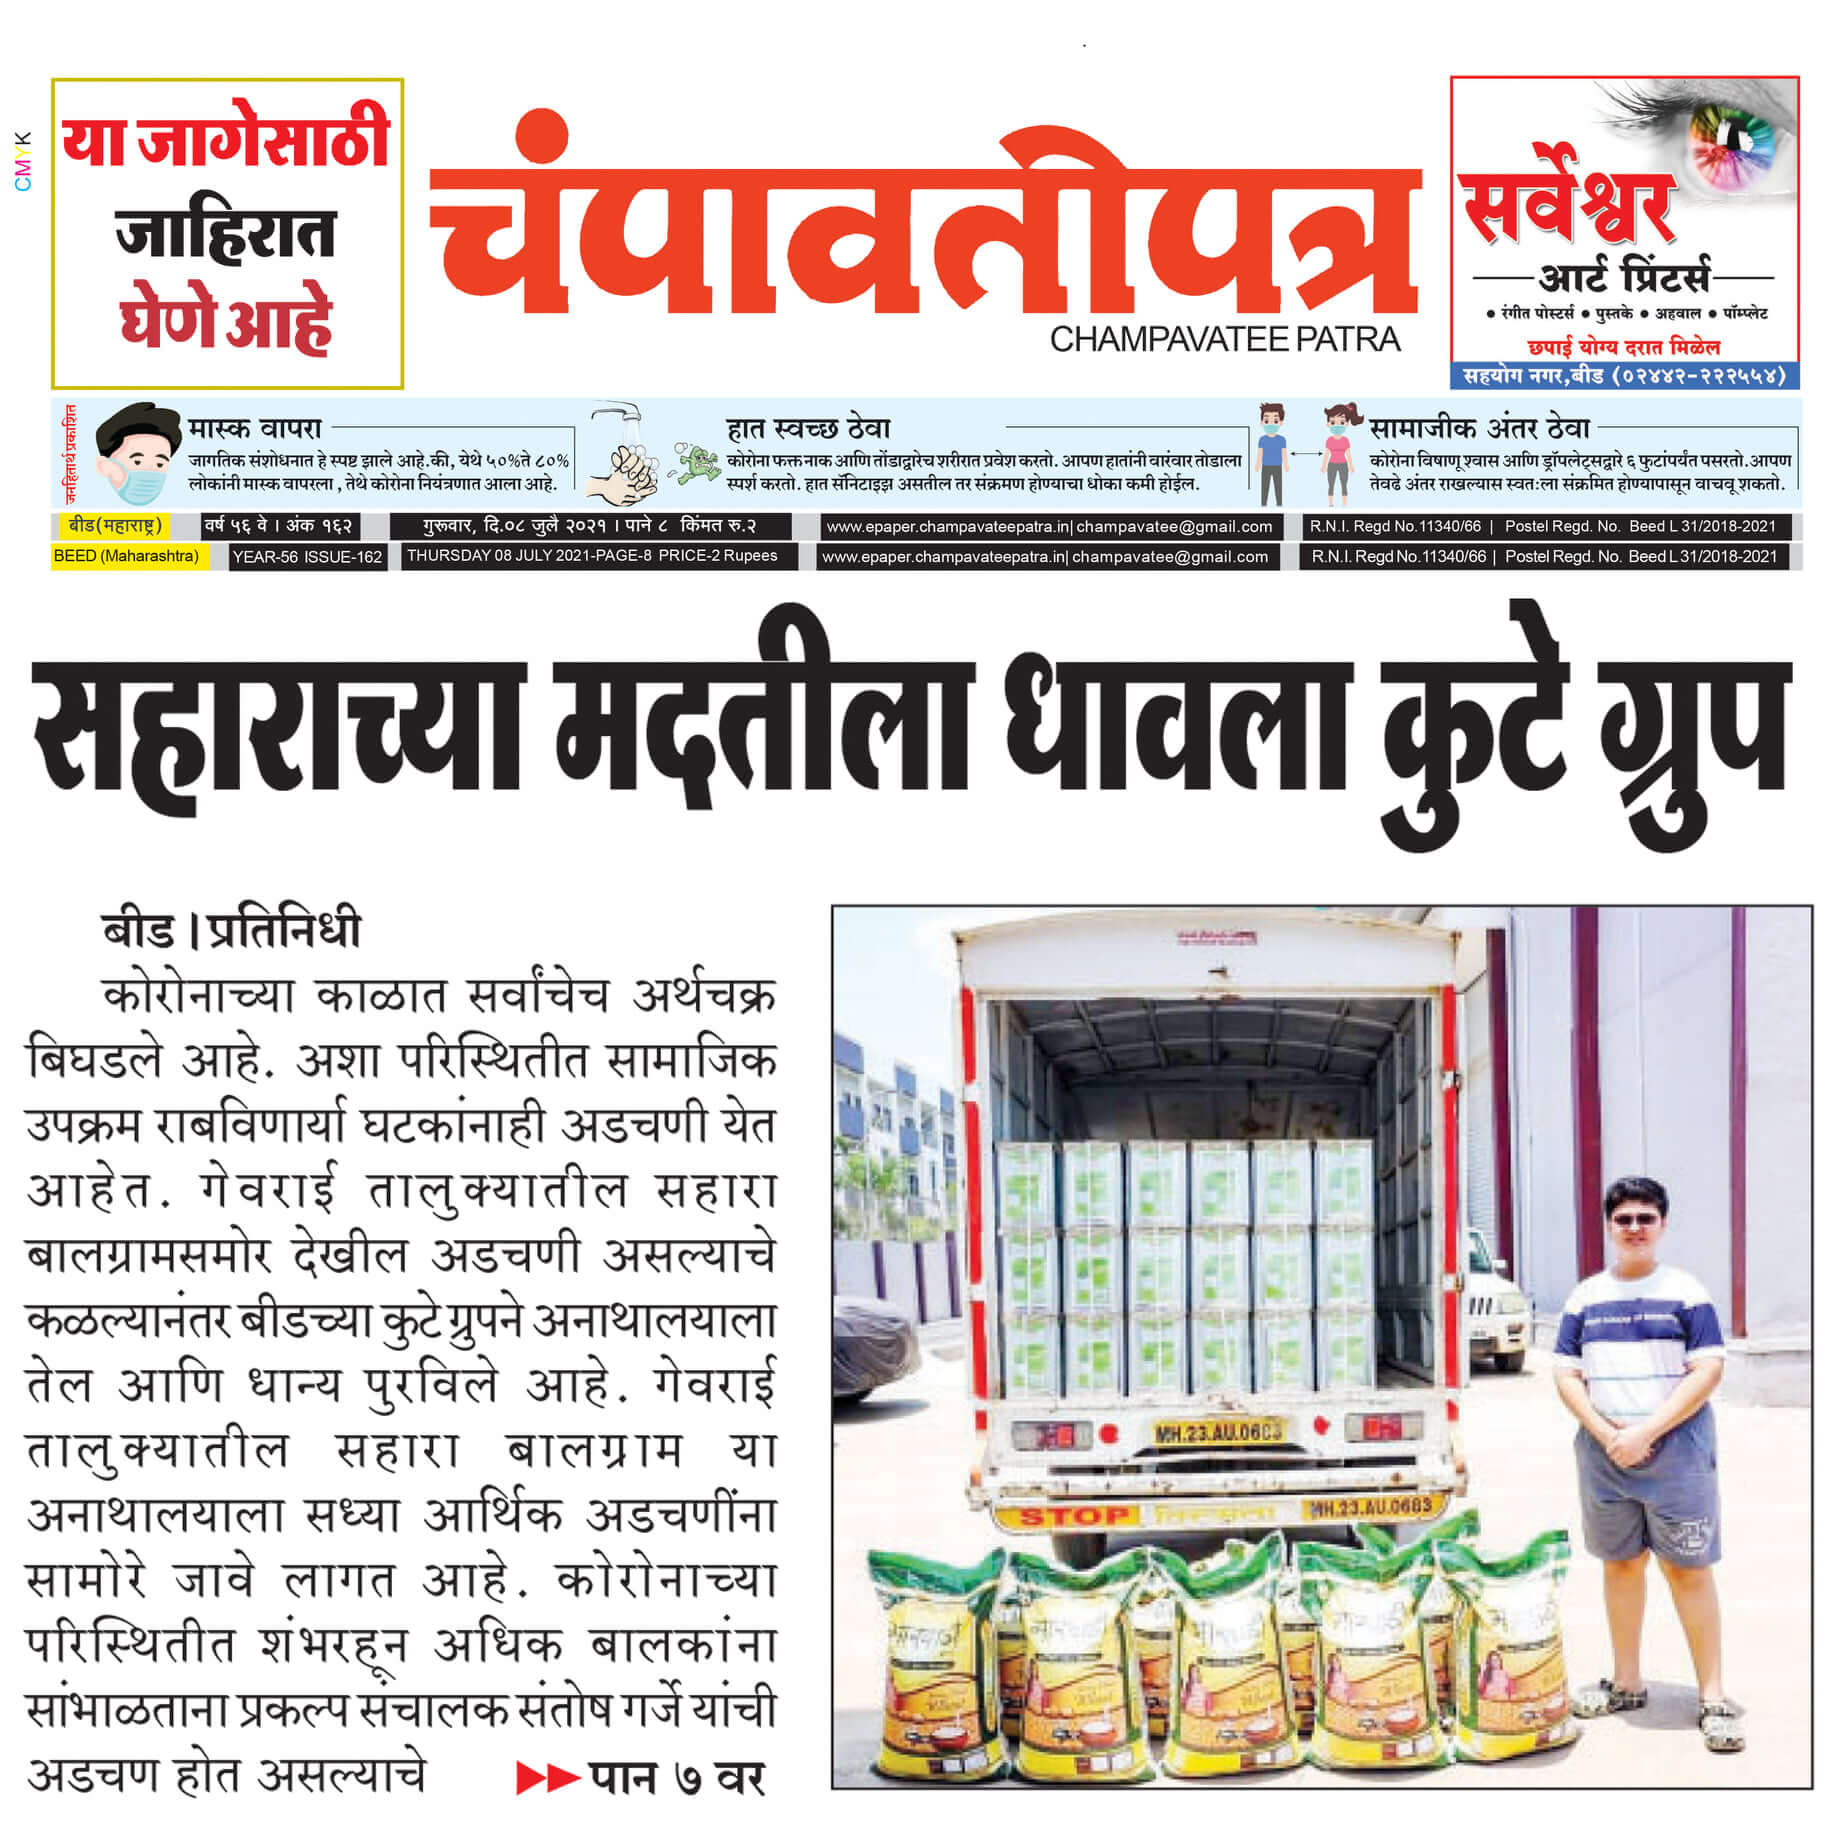 Leading daily Champavatipatra featured The Kute Group Foundation for donating Foodgrain items to orphanage